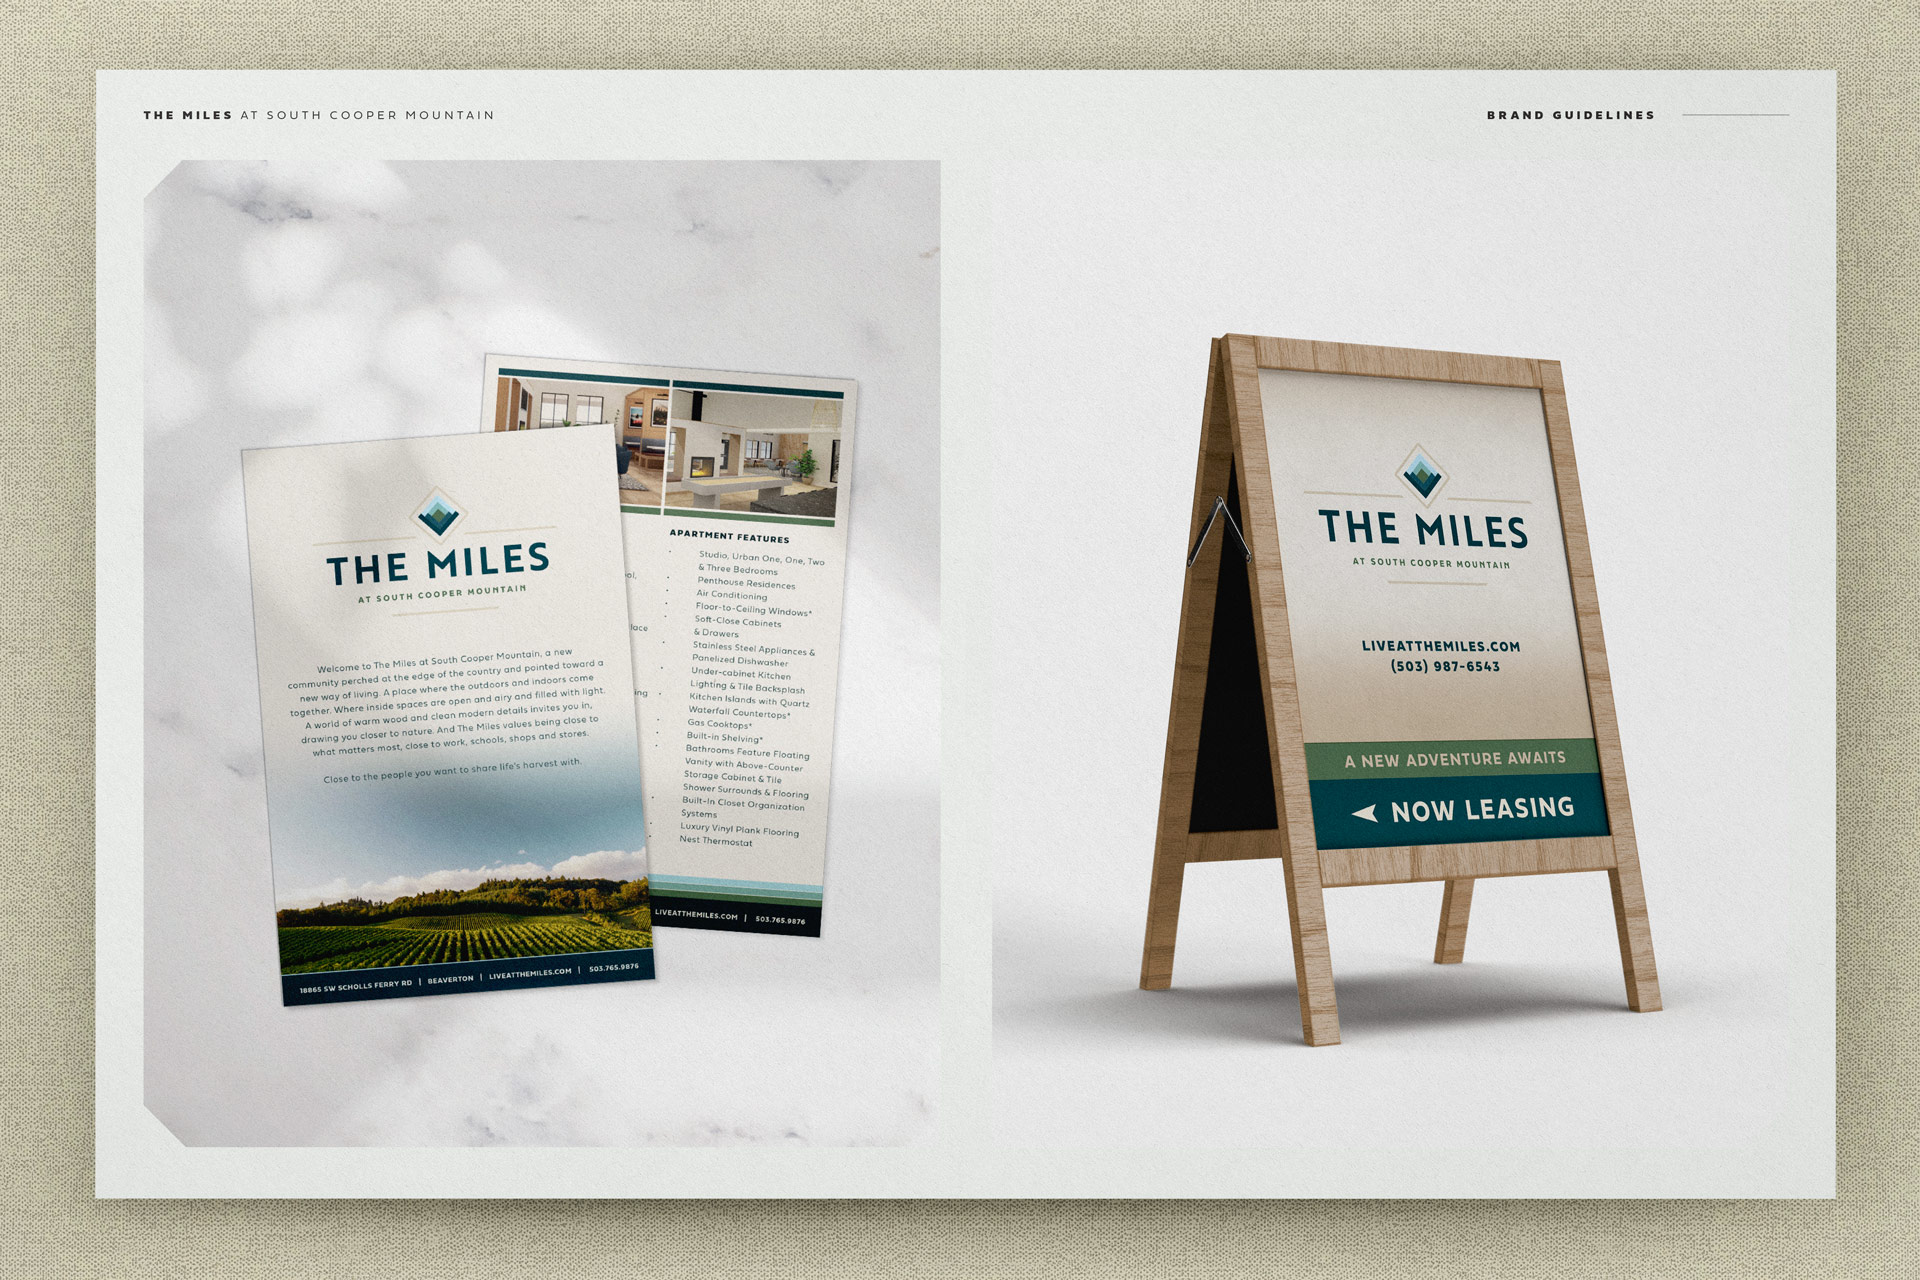 The Miles at South Cooper Mountain brand mockups created by Incubate Design